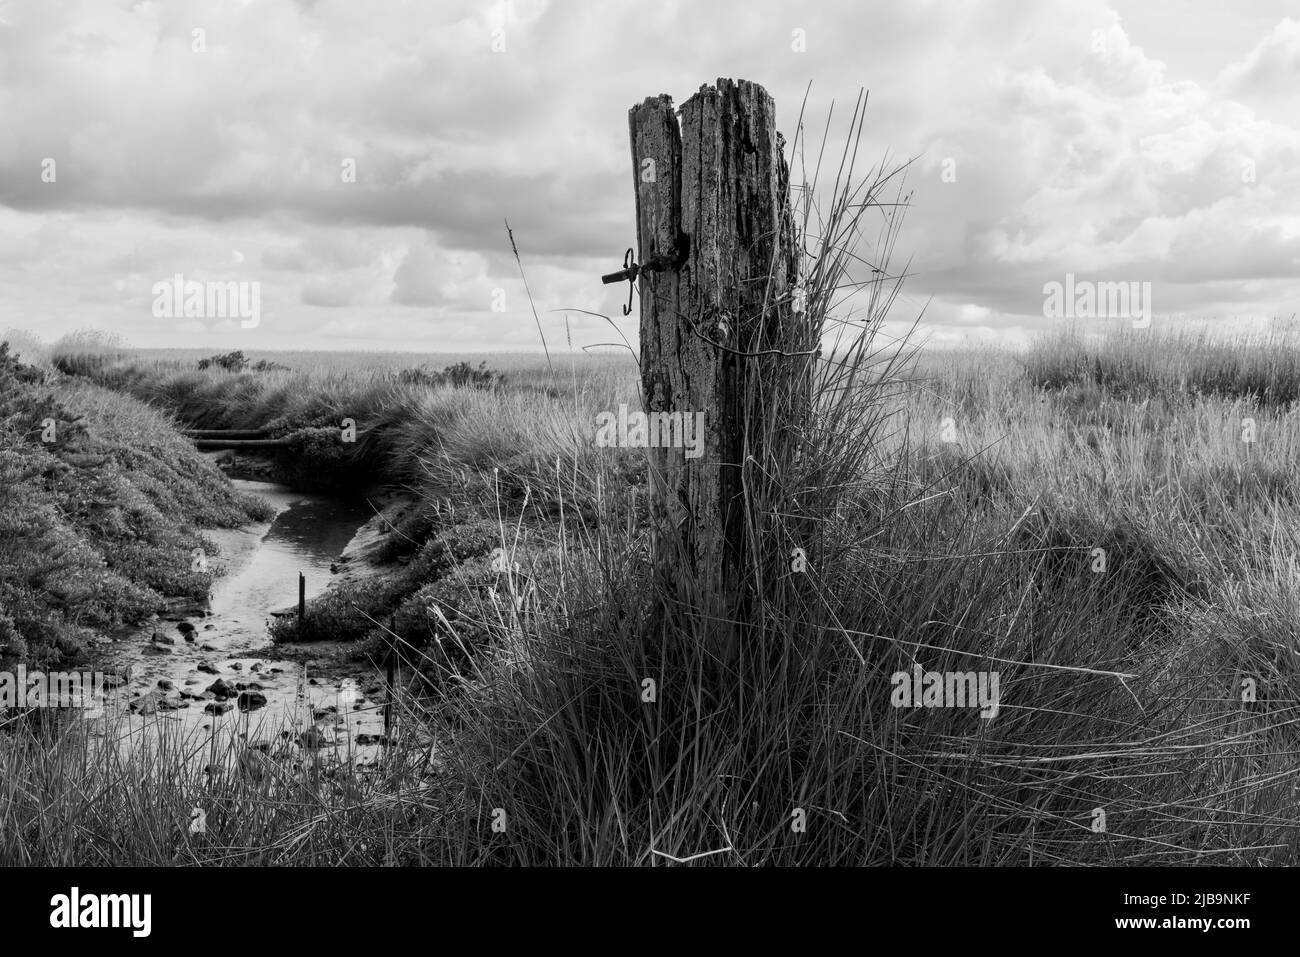 Black and White Artistic image of an old post in the Norfolk Marshes next to a small channel.  Depicts a harsh and wild yet beautiful landscape. Stock Photo